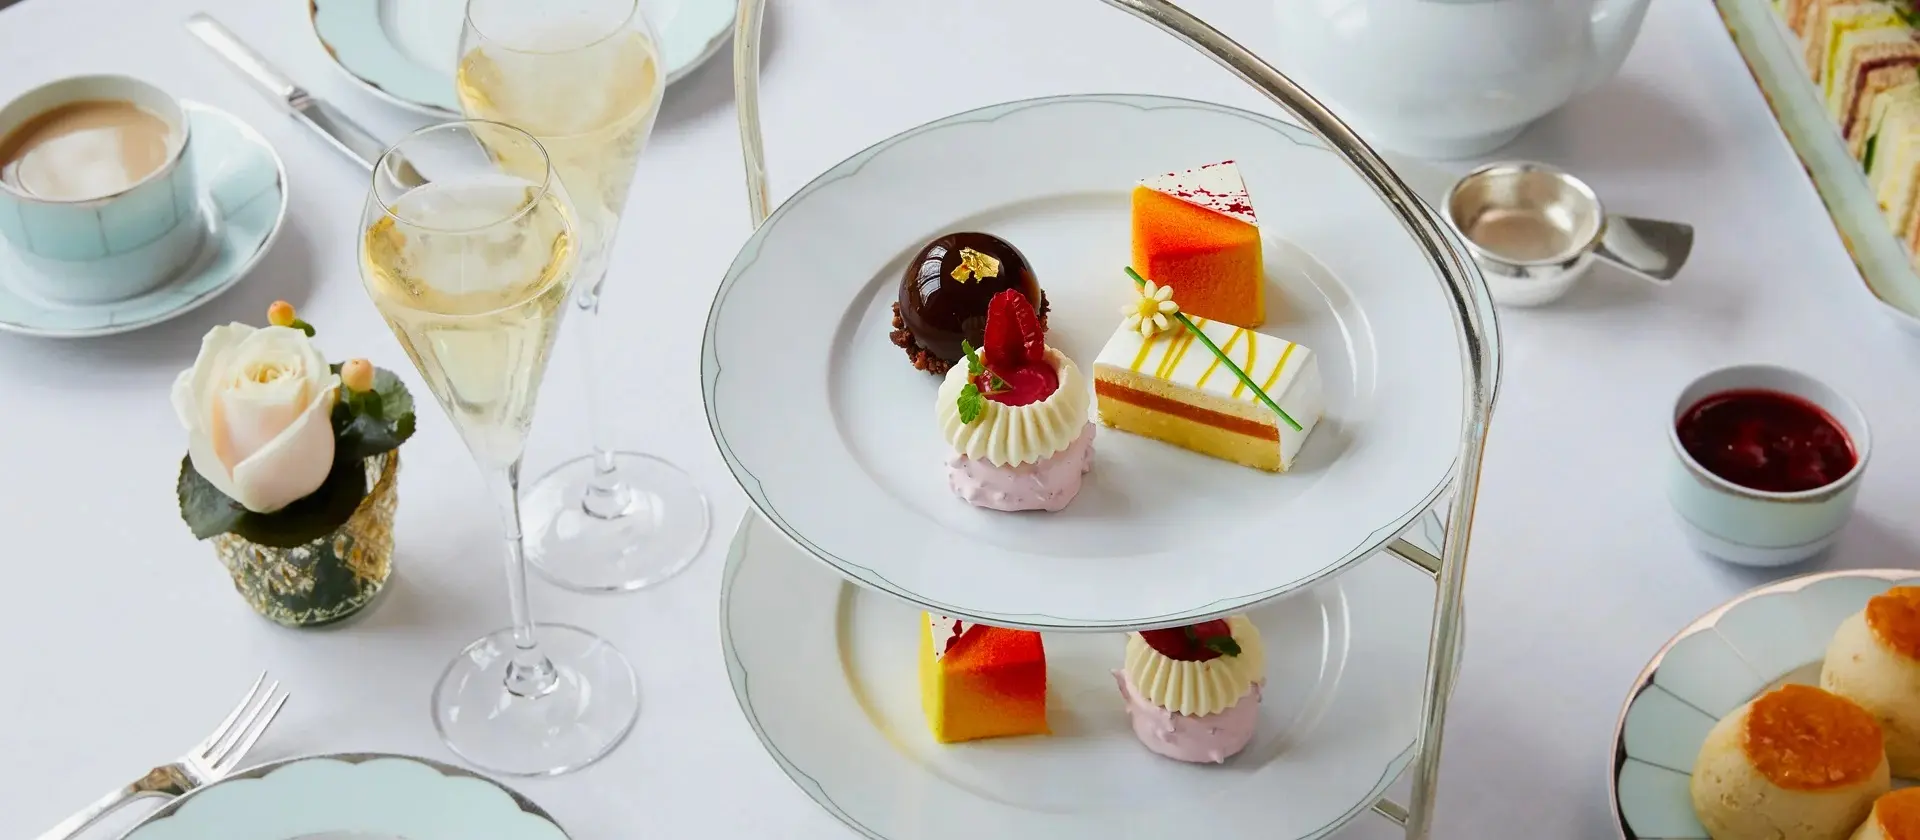 Hotel review Restaurants & Bars' - The Dorchester - Dorchester Collection - 5